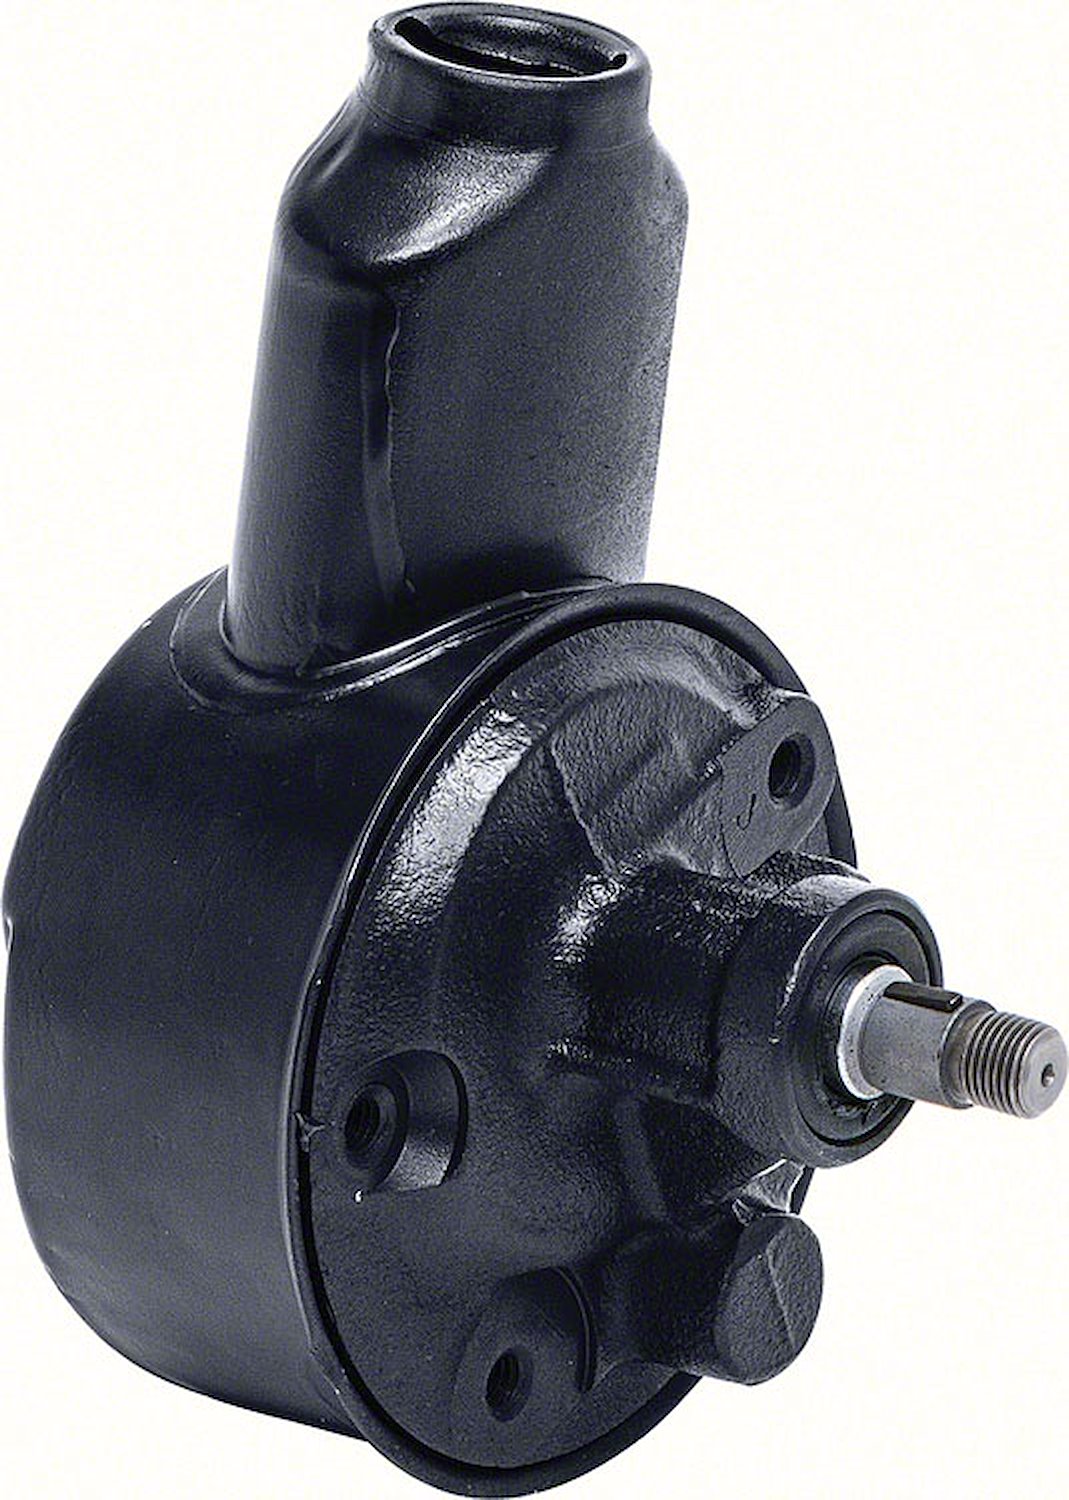 A6165 Remanufactured Power Steering Pump With "Banjo Stype" Reservoir 1970 Impala/Full Size 350/400